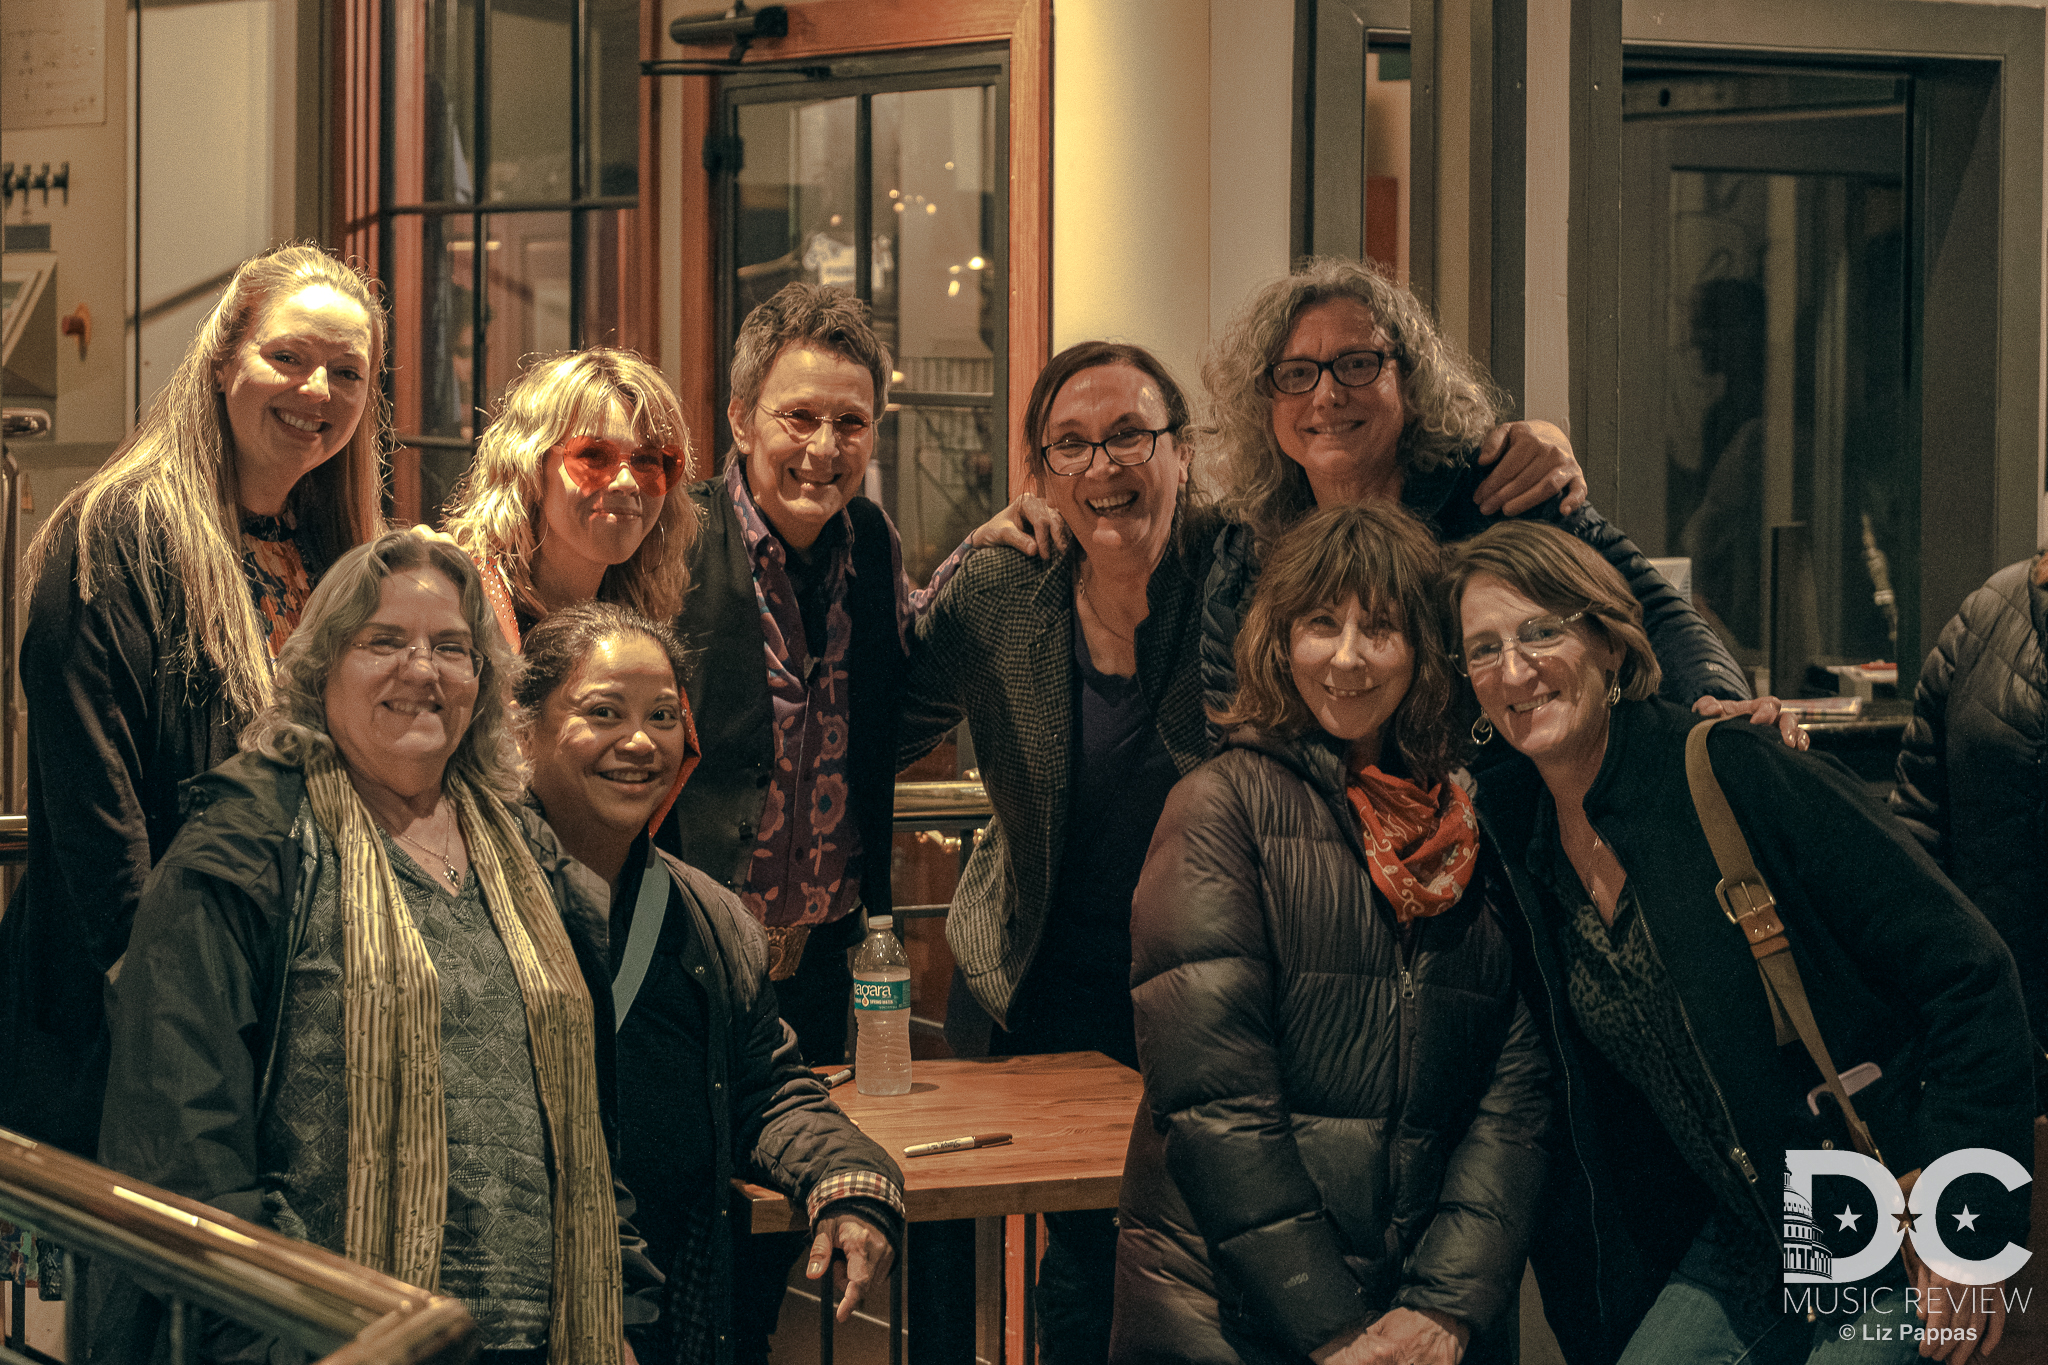 The women behind the first Mary Gauthier Tribute Show (L to R) Eryn Michel, Debbie St. Charles, Jillian Matundan, Susan Rowe, Lynn Hollyfield, Annette Wasilik, and Michelle Swan with Jamie Harris (L) and Mary Gauthier (R).